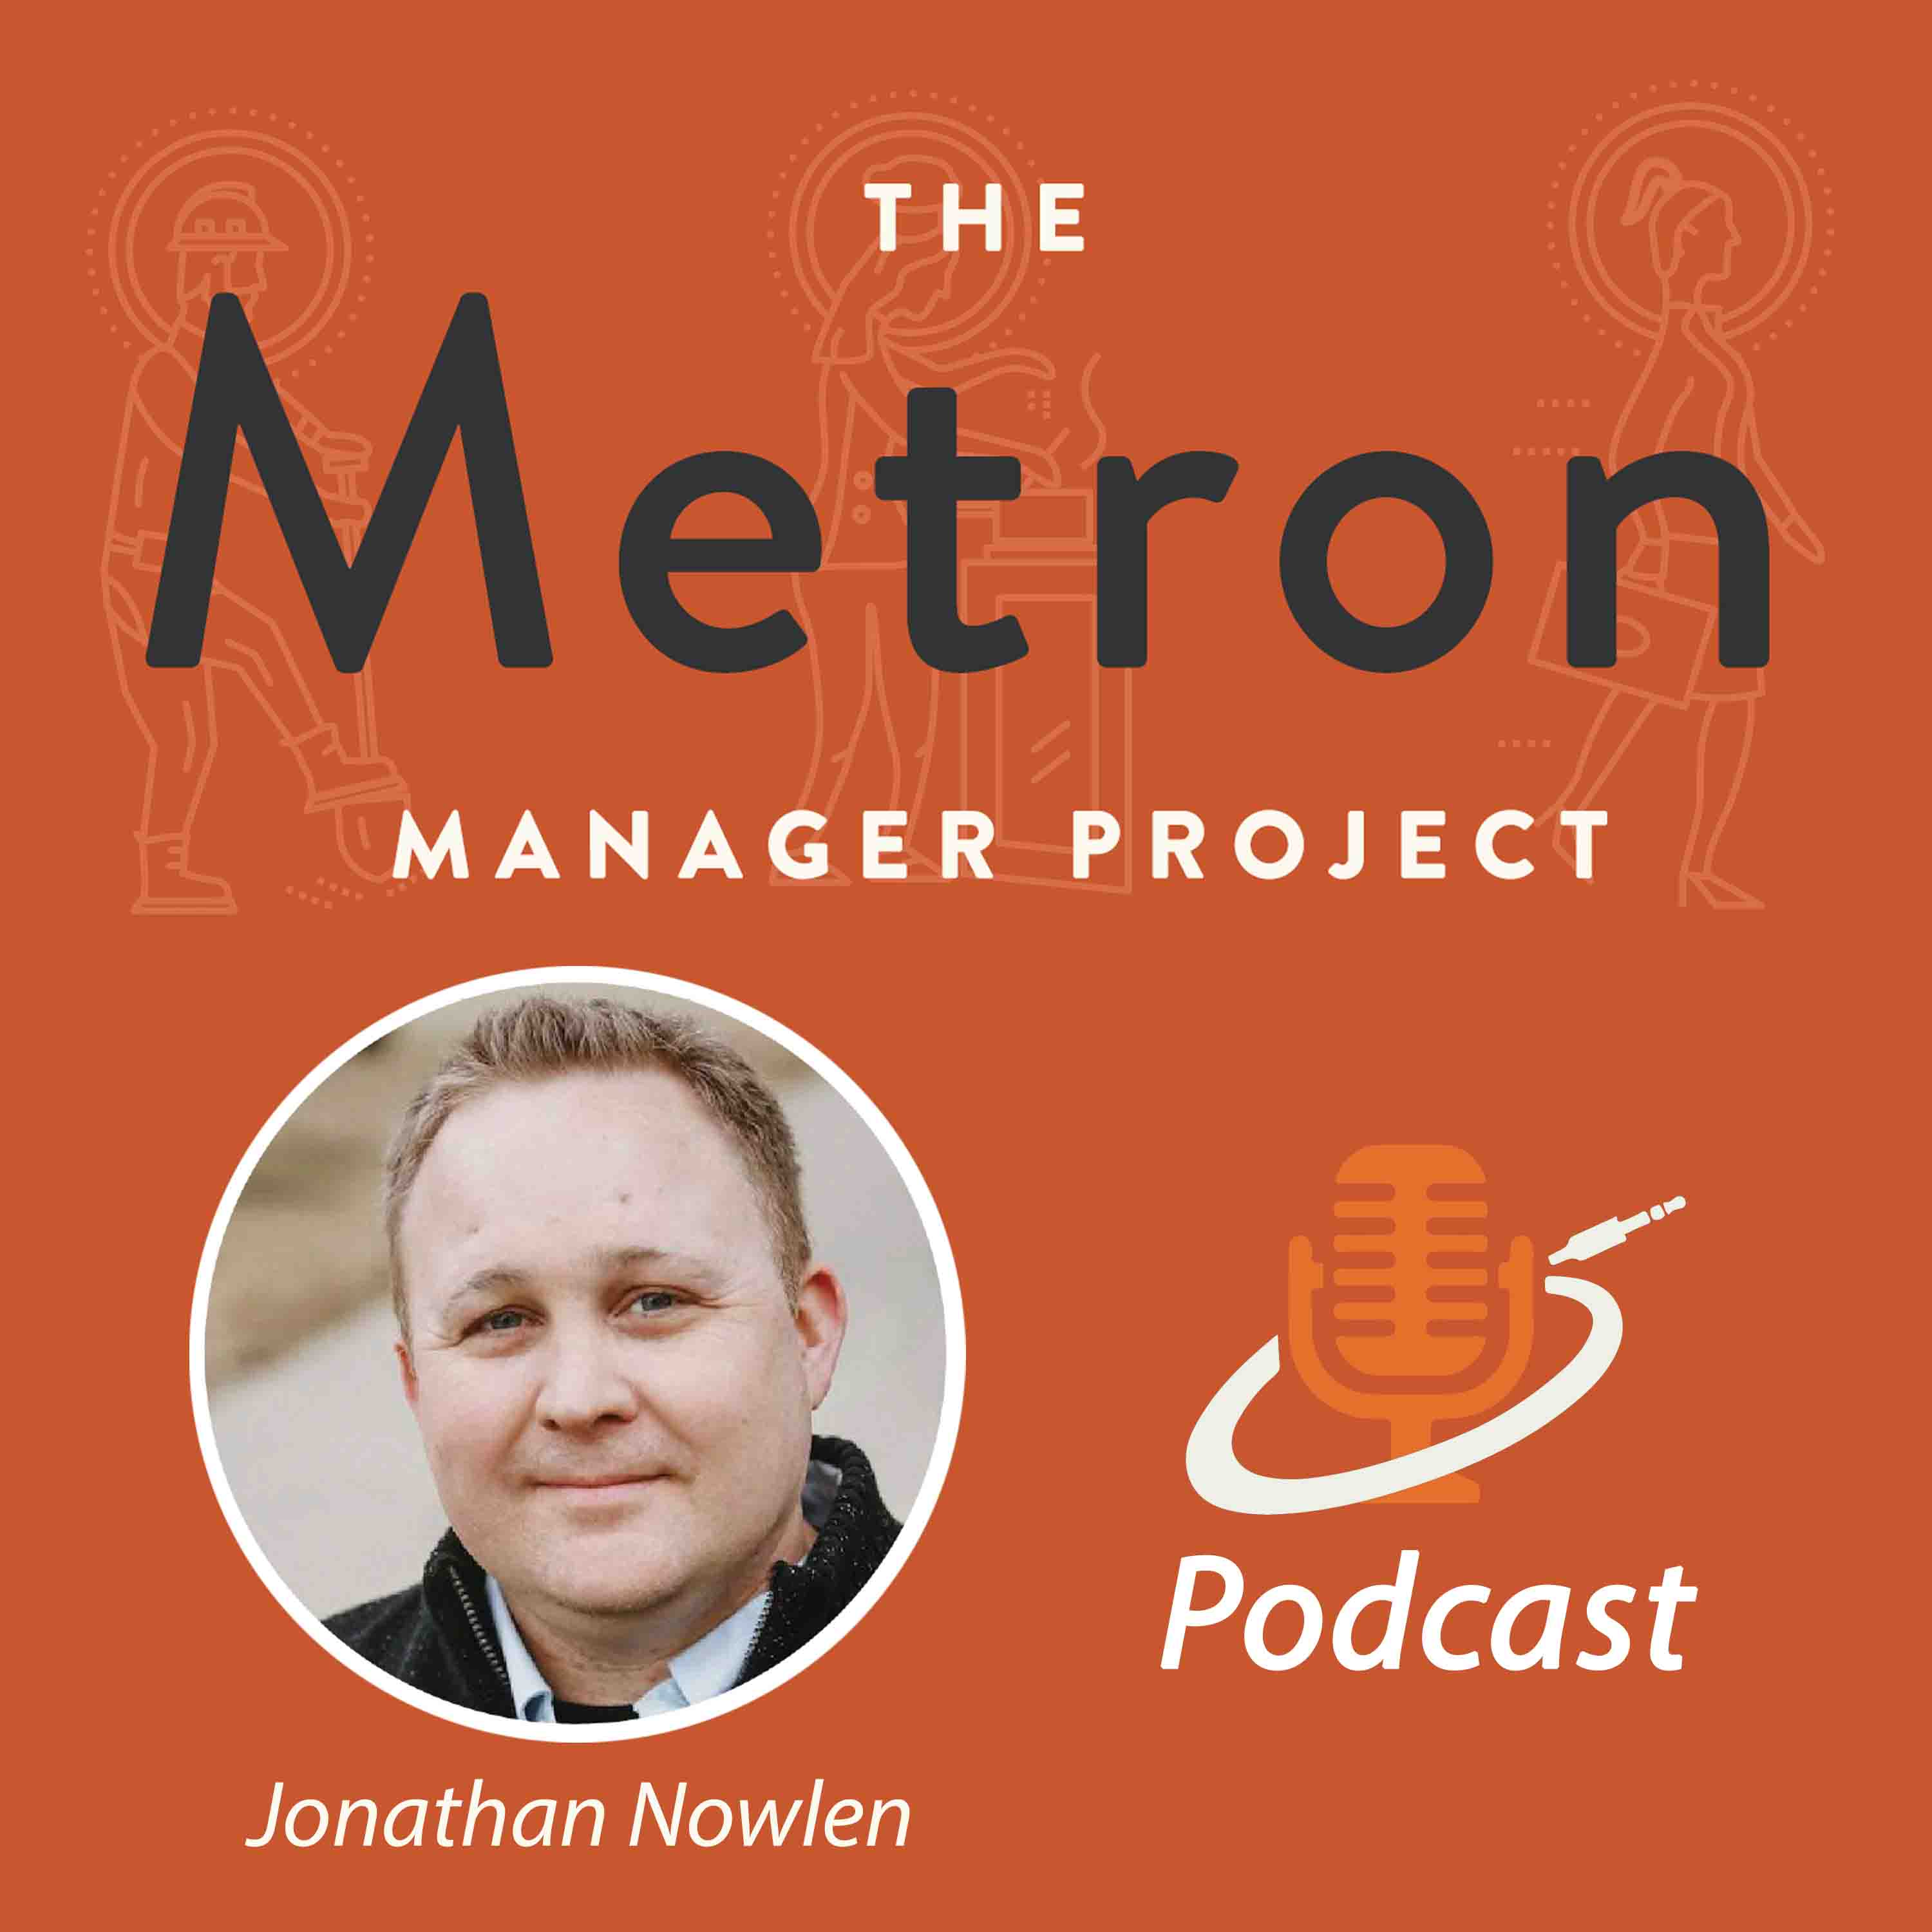 Artwork for podcast The Metron Manager Project